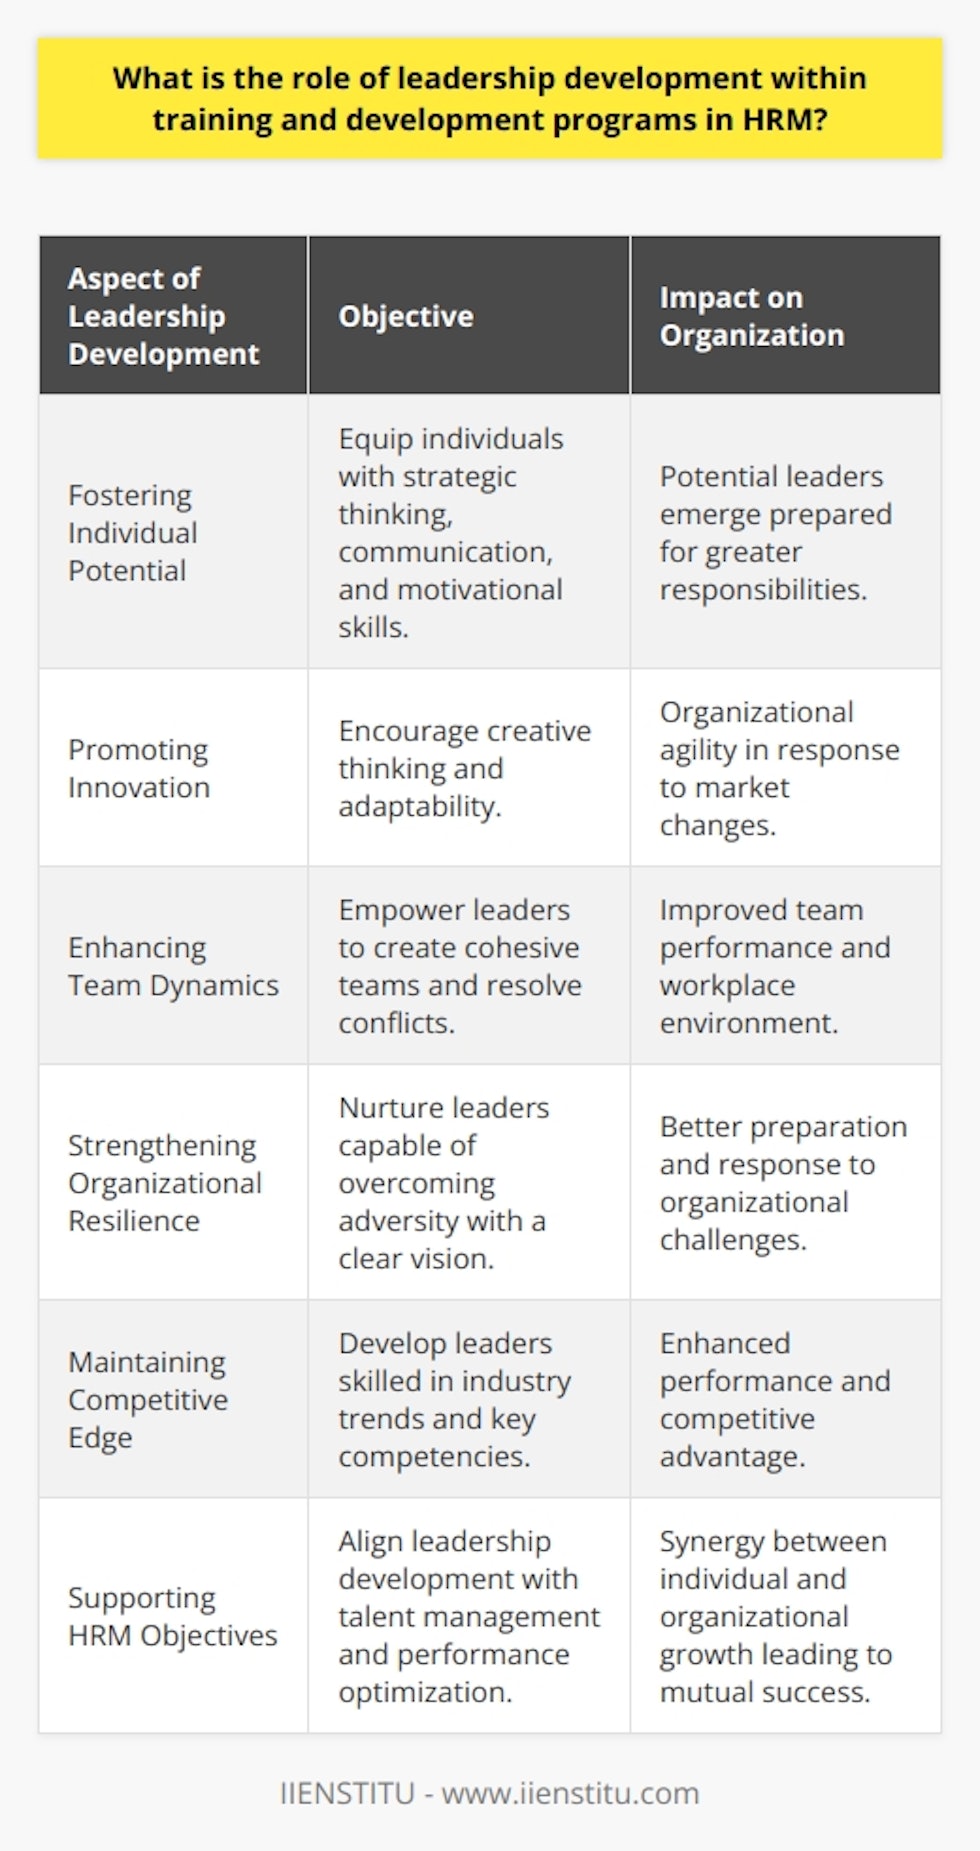 Leadership development within HRM training and development programs is a strategic component that focuses on cultivating the necessary capabilities among individuals to lead and influence others effectively. The role this form of development plays within an organization cannot be understated, as it impacts multiple facets that contribute to the overall success and sustainability of the business.Fostering Individual PotentialLeadership development programs target employees with the potential to take on more significant responsibilities. These programs offer structured learning experiences, often combining theoretical knowledge with practical application. This blend of learning equips individuals with a diverse skill set geared towards strategic thinking, effective communication, and team motivation.Promoting InnovationIn today’s rapidly evolving business landscape, leaders must be able to foster innovation. Leadership development plays a fundamental role here by encouraging individuals to embrace change and think creatively. Leaders trained to drive innovation can better position their organizations to adapt and thrive amidst market disruptions.Enhancing Team DynamicsThe influence a leader has on team dynamics is significant. Leadership development aims to empower leaders with the ability to build cohesive teams. This involves teaching leaders how to recognize the diverse strengths of team members, distribute tasks effectively, resolve conflicts, and create an atmosphere of mutual respect and collaboration.Strengthening Organizational ResilienceOrganizations equipped with strong leaders are more resilient in the face of challenges. Leadership development helps bolster this resilience by nurturing leaders who can navigate adversity while maintaining a clear vision for the future. These leaders are often the standard-bearers of perseverance and adaptability within their teams.Maintaining Competitive EdgeInvesting in leadership development is directly linked to maintaining and enhancing an organization's competitive edge. Leaders who are well-versed in industry trends and possess advanced skill sets can guide their teams to achieve and exceed strategic objectives, thus staying ahead of competitors.Supporting HRM ObjectivesThe role of leadership development aligns closely with broader HRM objectives such as talent management, employee satisfaction, and performance optimization. By developing leaders, HRM can ensure that there is alignment between individual aspirations and organizational goals, creating a synergistic environment where both can thrive.In conclusion, leadership development is paramount within HRM training and development programs. It shapes the fabric of the organization by nurturing capable leaders who are not only equipped to manage and inspire teams but also drive the organization forward. Through continual investment in leadership development, organizations can expect to see tangible benefits that resonate across their entire operations.